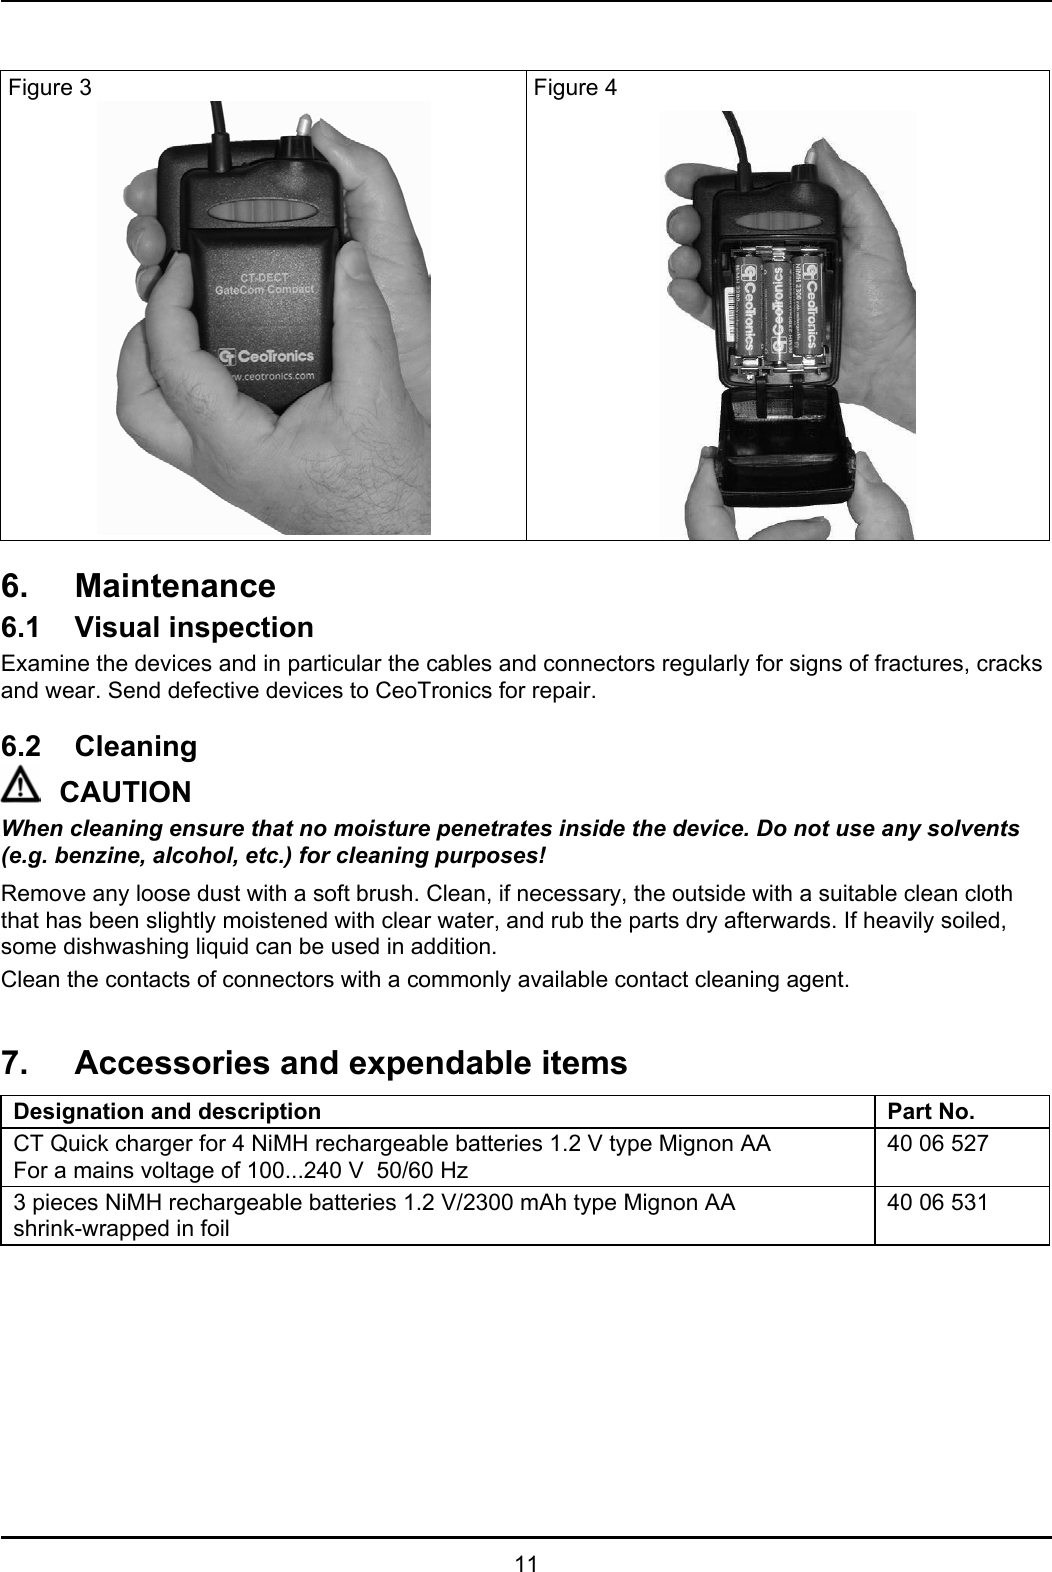   11   Figure 3  Figure 4  6. Maintenance 6.1 Visual inspection Examine the devices and in particular the cables and connectors regularly for signs of fractures, cracks and wear. Send defective devices to CeoTronics for repair.  6.2 Cleaning CAUTION When cleaning ensure that no moisture penetrates inside the device. Do not use any solvents (e.g. benzine, alcohol, etc.) for cleaning purposes! Remove any loose dust with a soft brush. Clean, if necessary, the outside with a suitable clean cloth that has been slightly moistened with clear water, and rub the parts dry afterwards. If heavily soiled, some dishwashing liquid can be used in addition.  Clean the contacts of connectors with a commonly available contact cleaning agent.  7.  Accessories and expendable items Designation and description Part No. CT Quick charger for 4 NiMH rechargeable batteries 1.2 V type Mignon AA  For a mains voltage of 100...240 V  50/60 Hz 40 06 527 3 pieces NiMH rechargeable batteries 1.2 V/2300 mAh type Mignon AA  shrink-wrapped in foil 40 06 531  